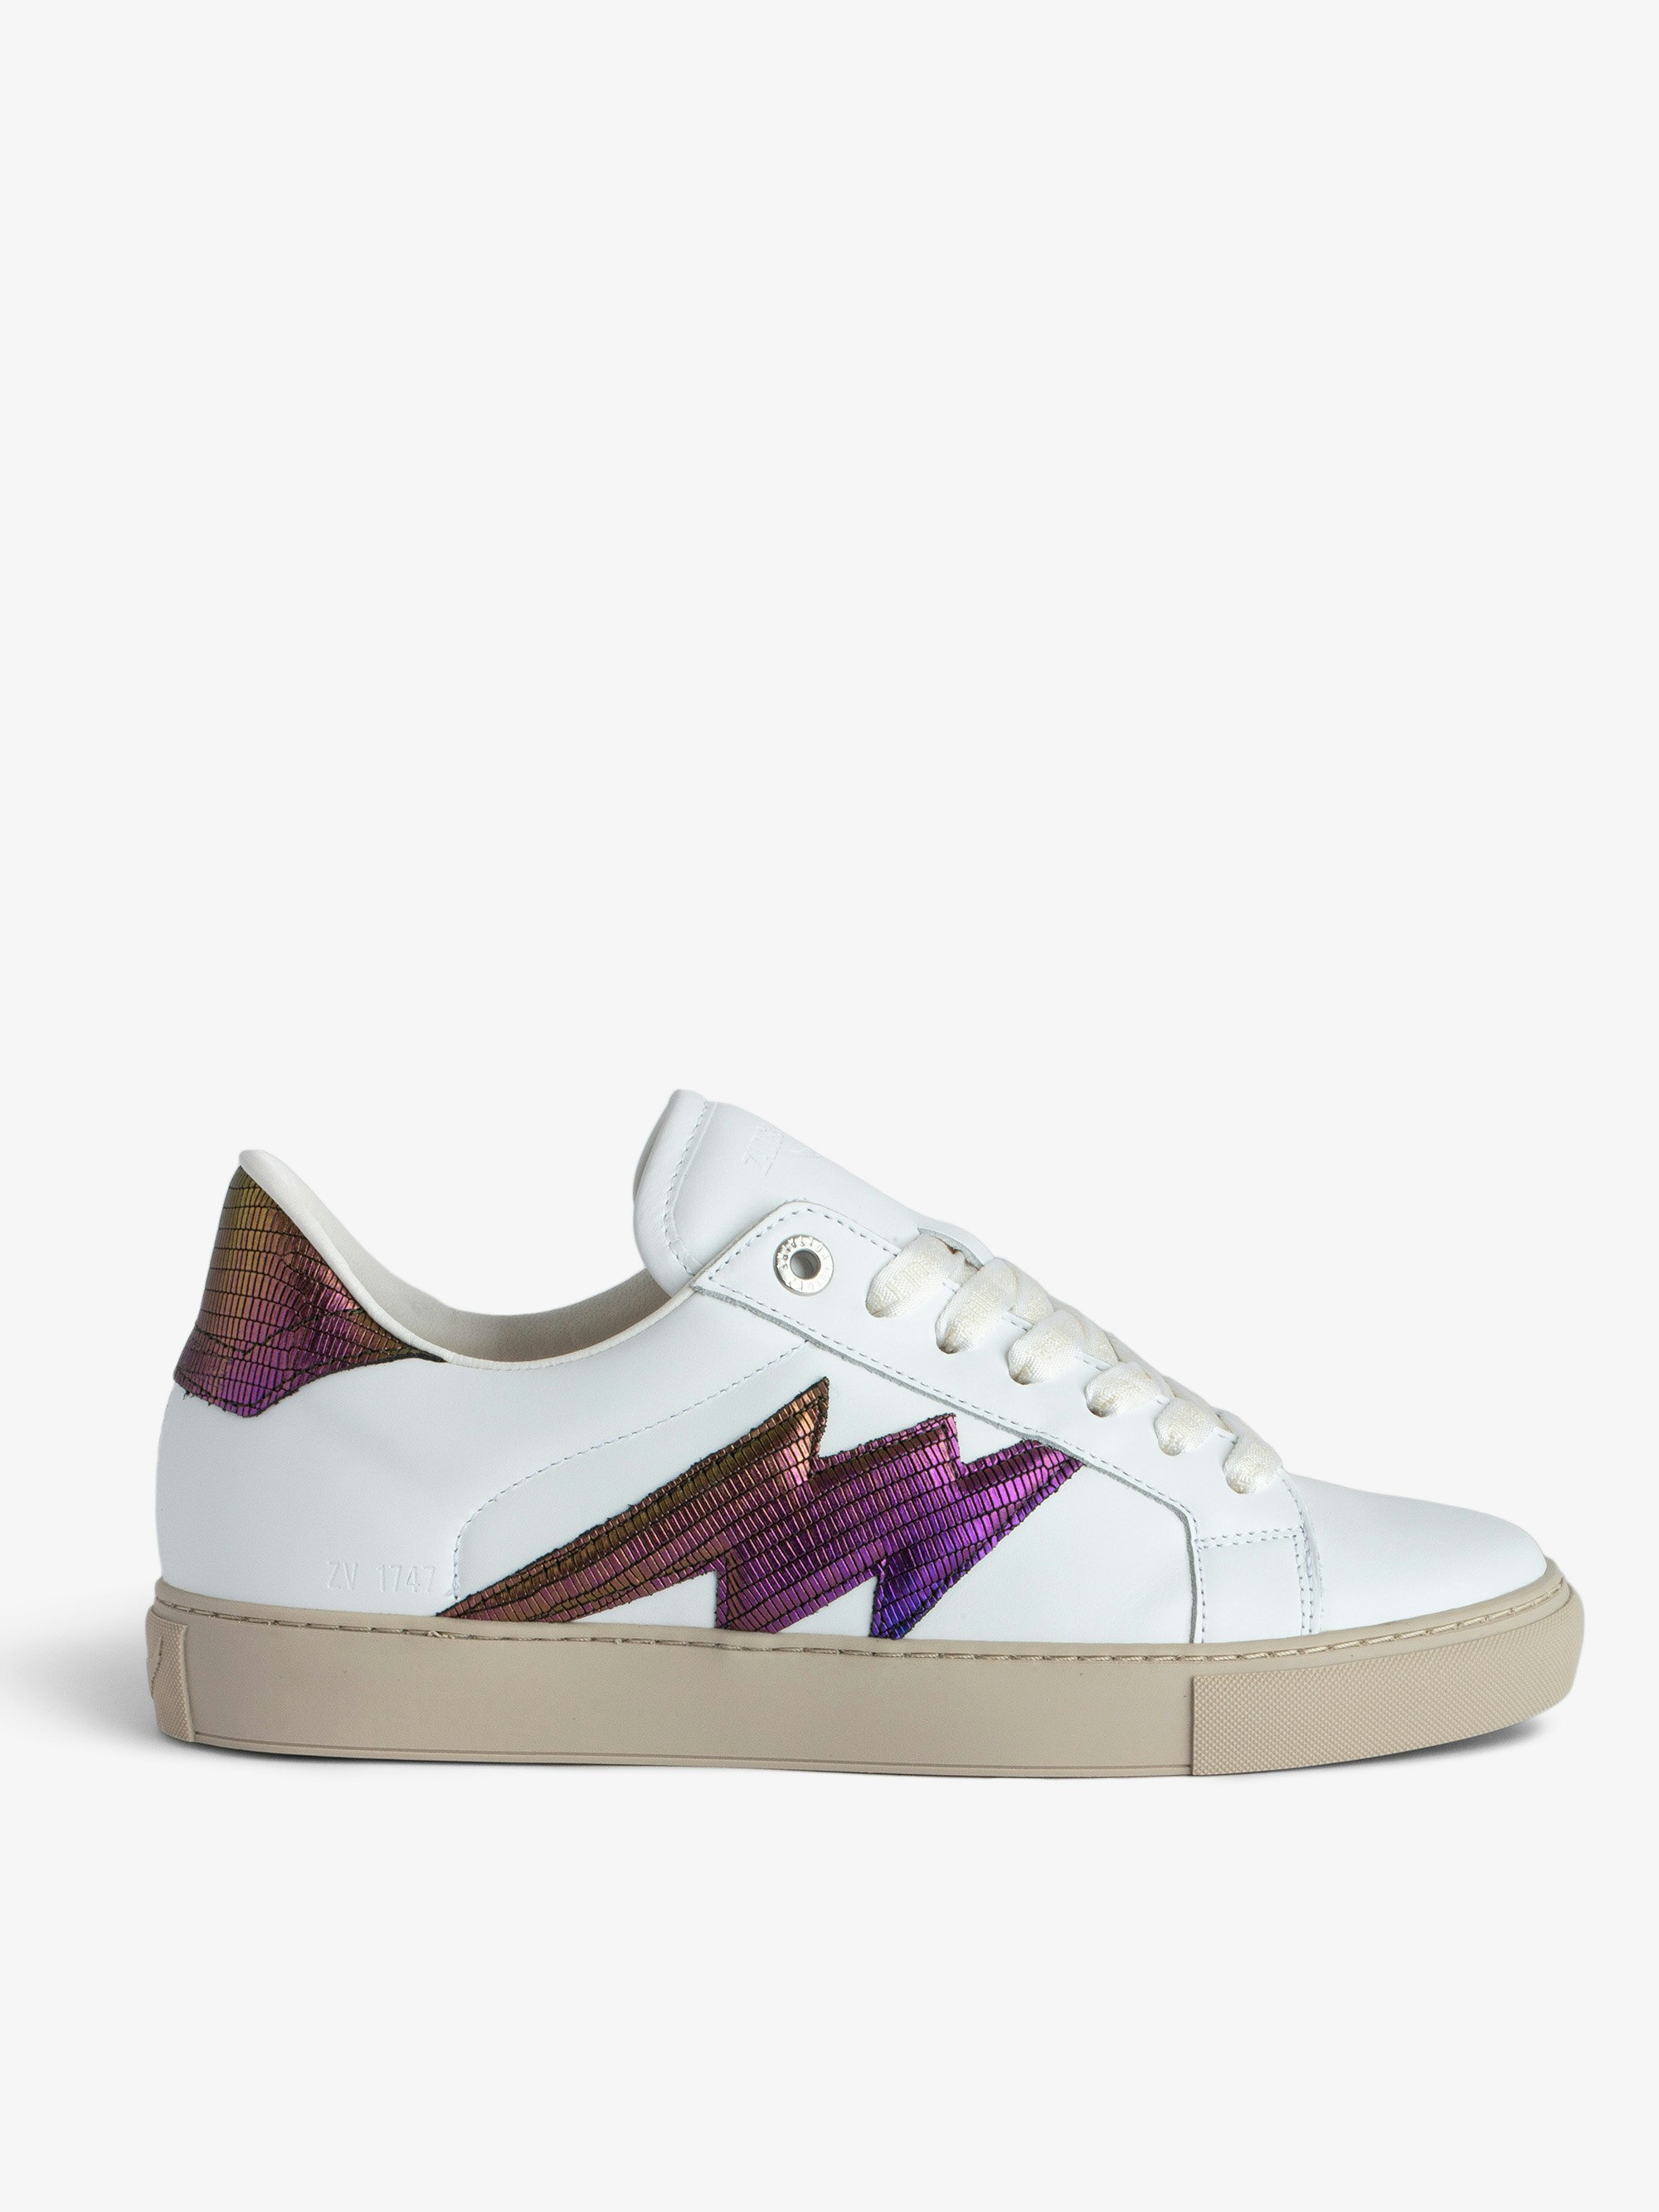 ZV1747 La Flash Embossed Metallic Low-Top Trainers - Ecru smooth leather low-top trainers with lightning bolt and rainbow iguana-embossed metallic reinforcement.